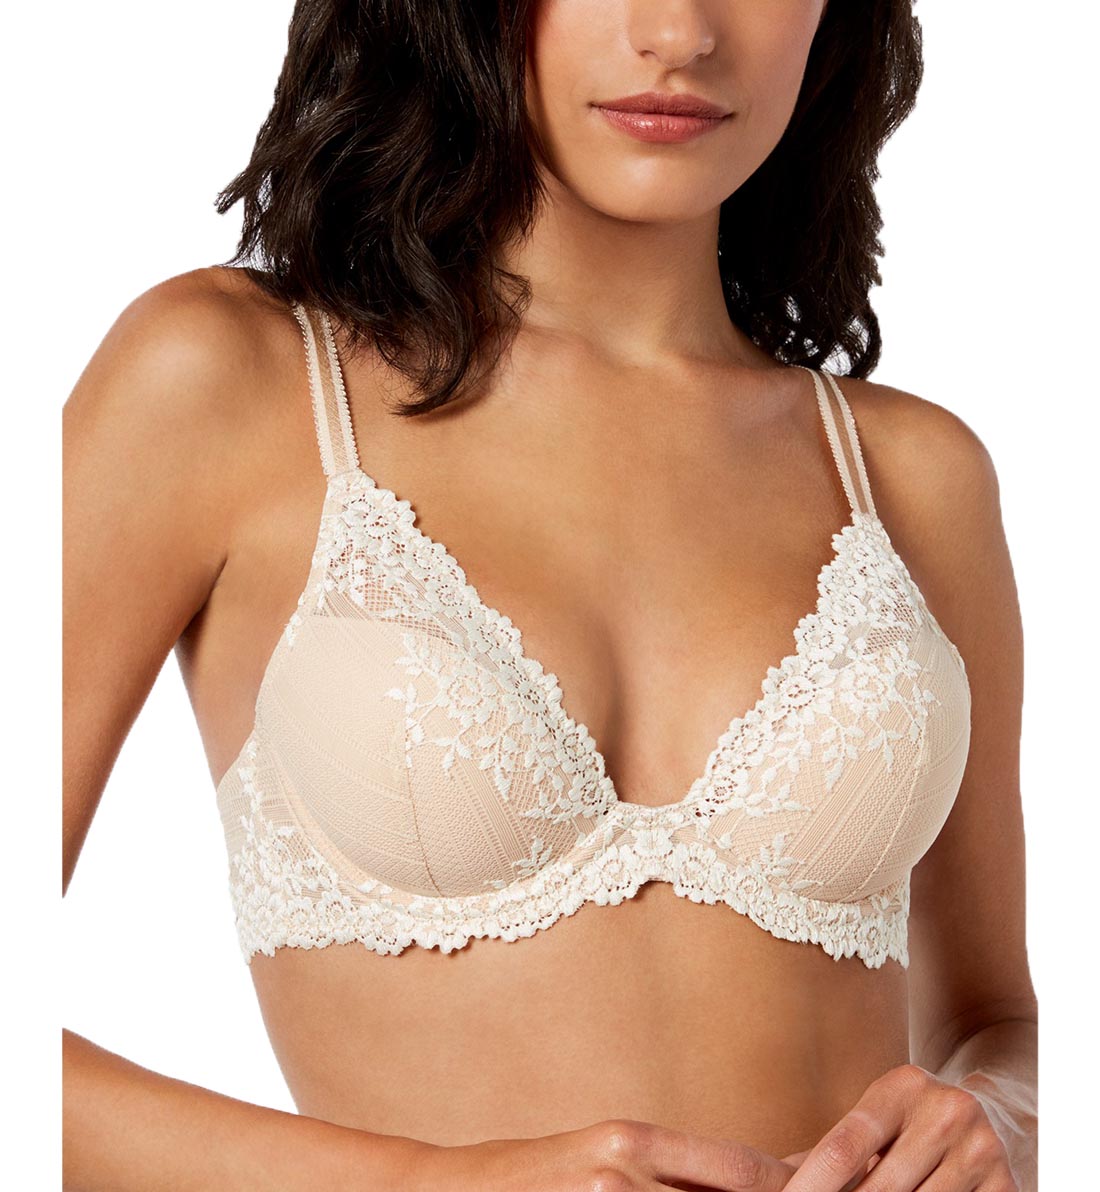 Wacoal Embrace Lace Plunge Contour Padded Underwire Bra (853291),32D,Natural Nude/Ivory - Natural Nude/Ivory,32D